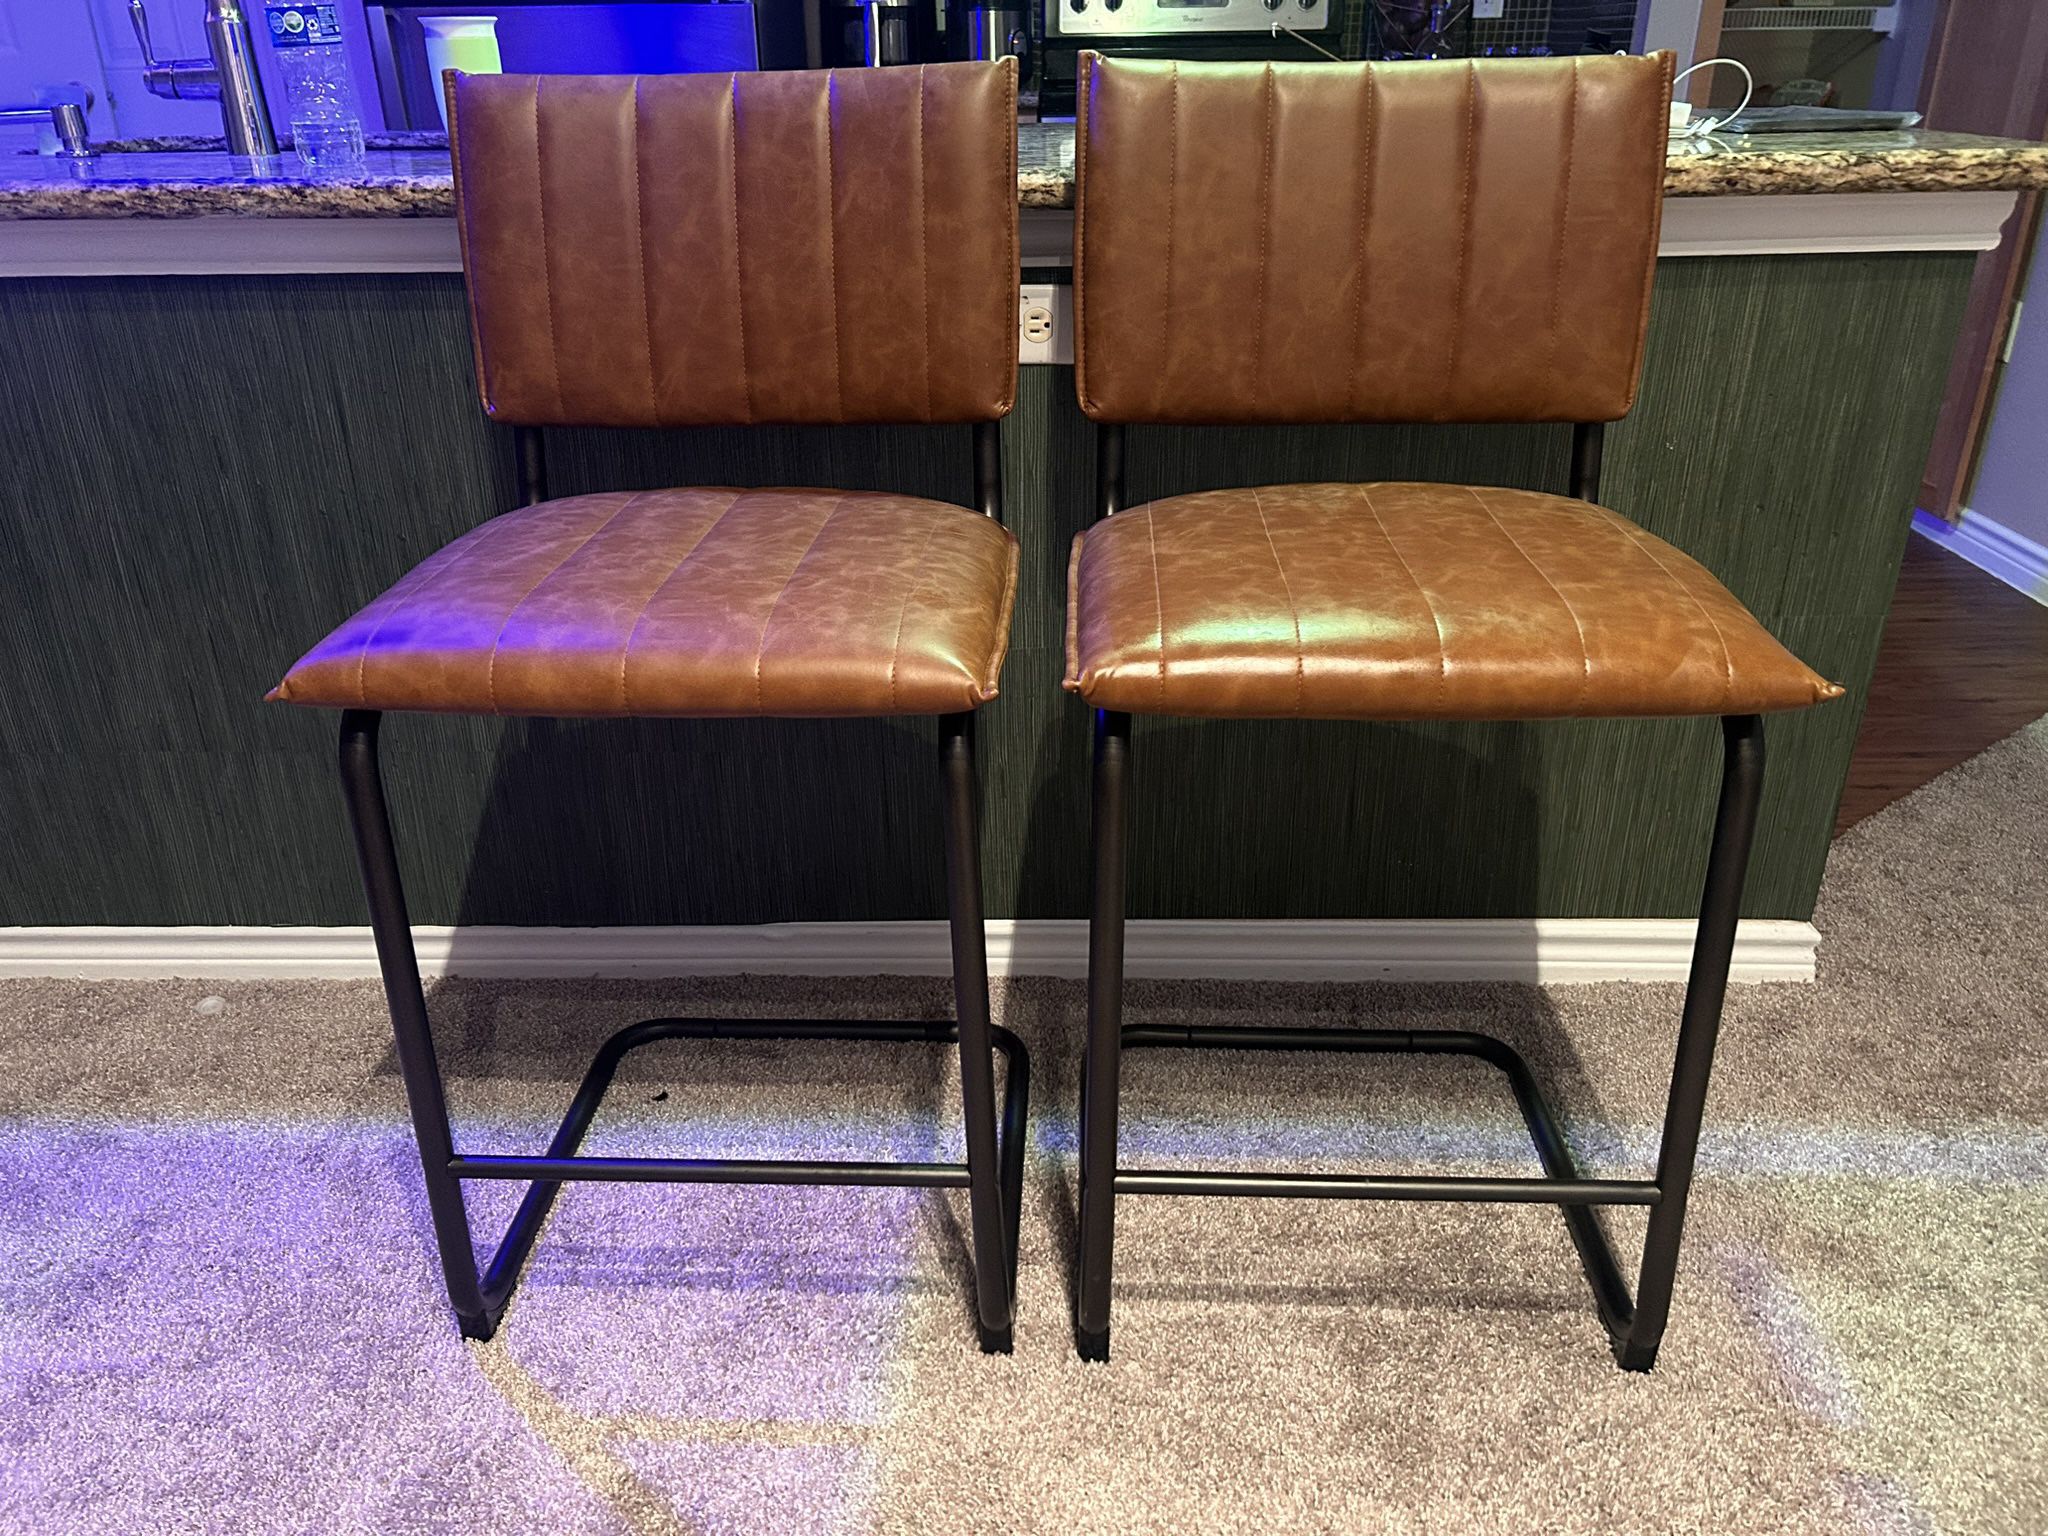 Two Stool Chairs Brand New 